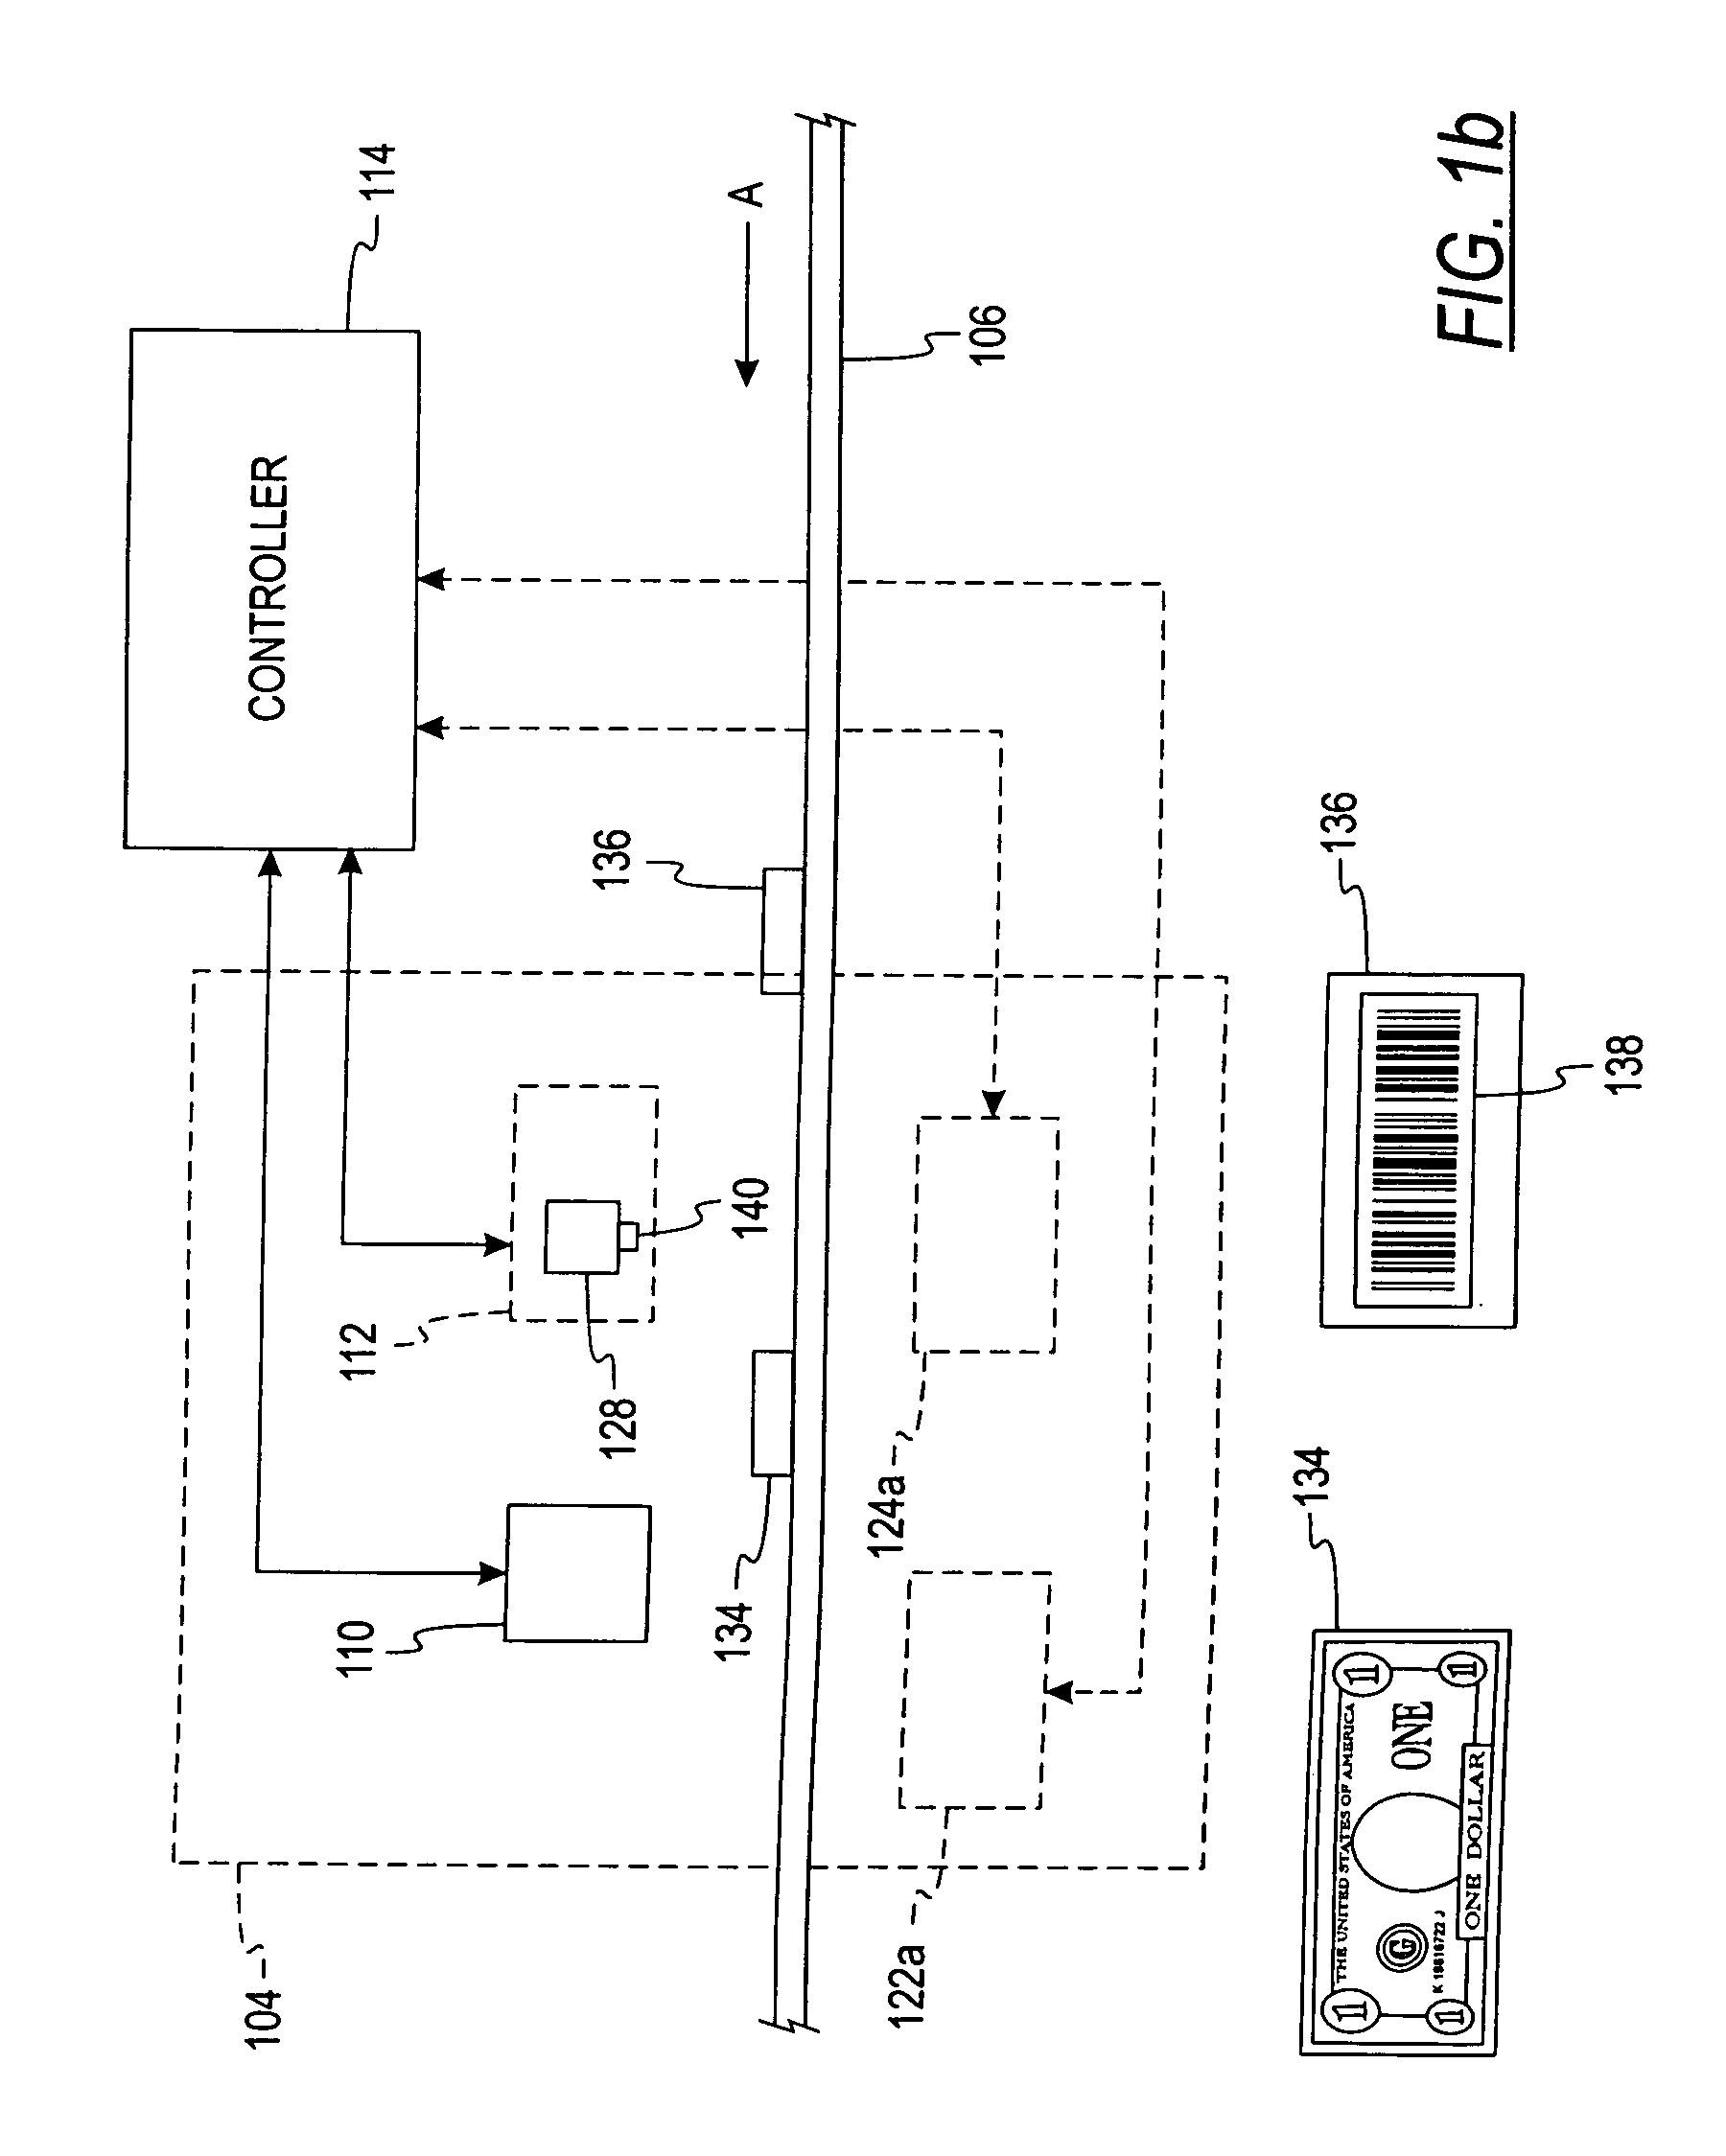 System and method for searching and verifying documents in a document processing device